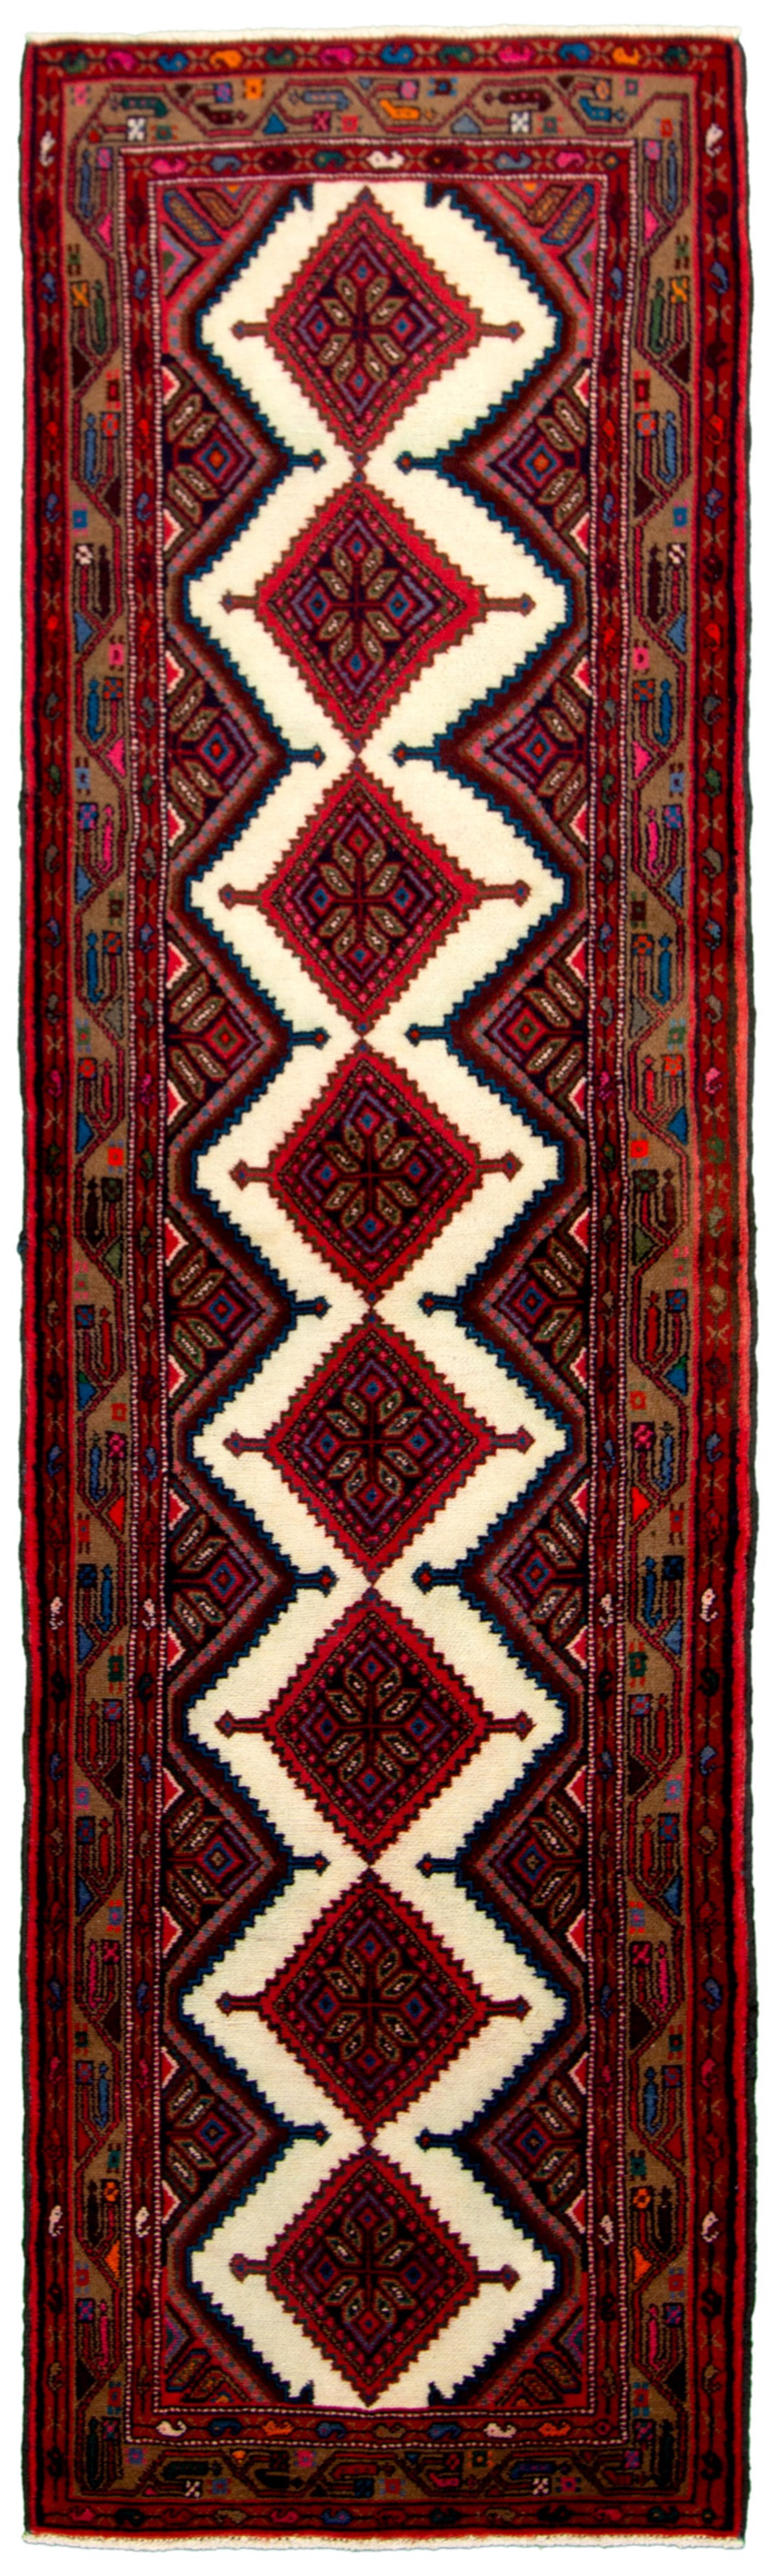 Hand-knotted Koliai Cream, Red Wool Rug 2'9" x 9'11" Size: 2'9" x 9'11"  